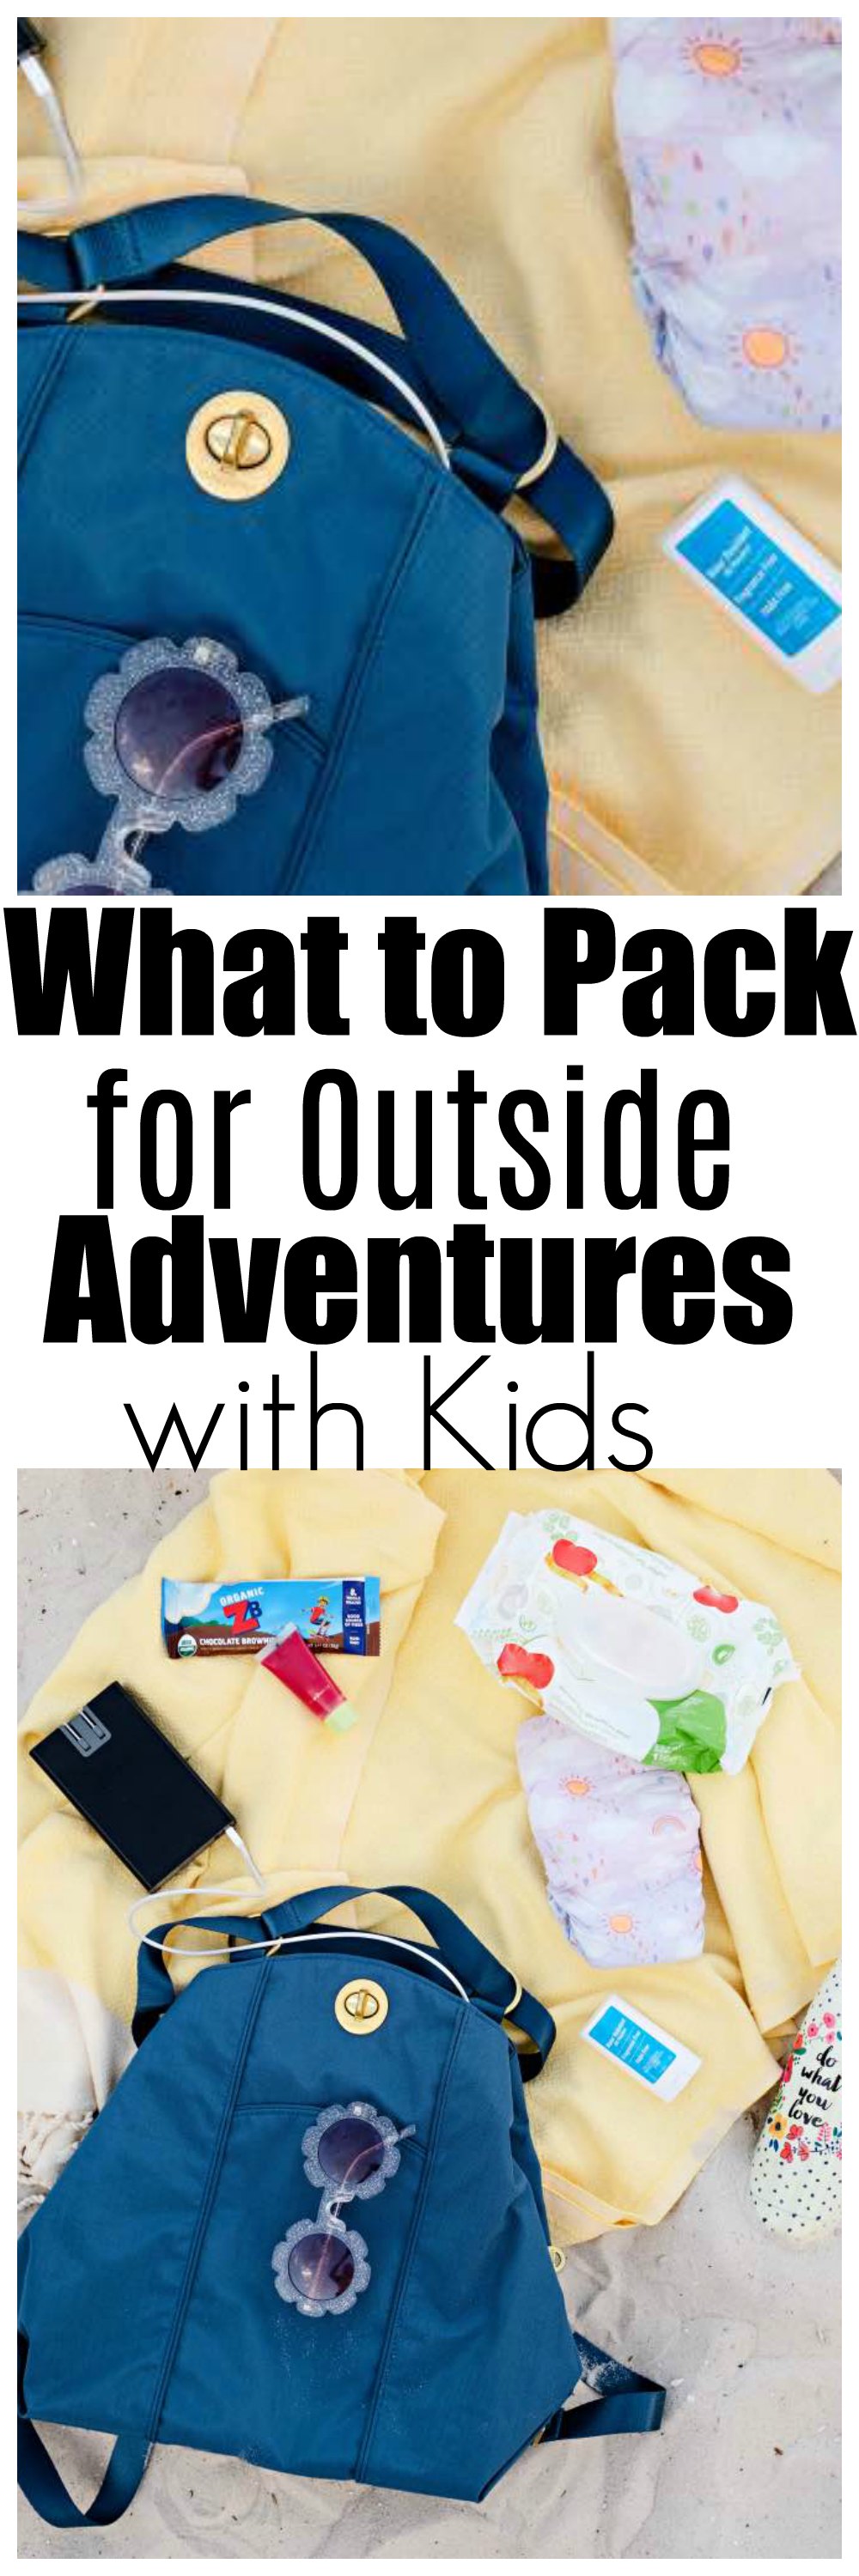 baggalini with zaps - What to Pack for a Day Out with Kids by Atlanta mom blogger Happily Hughes